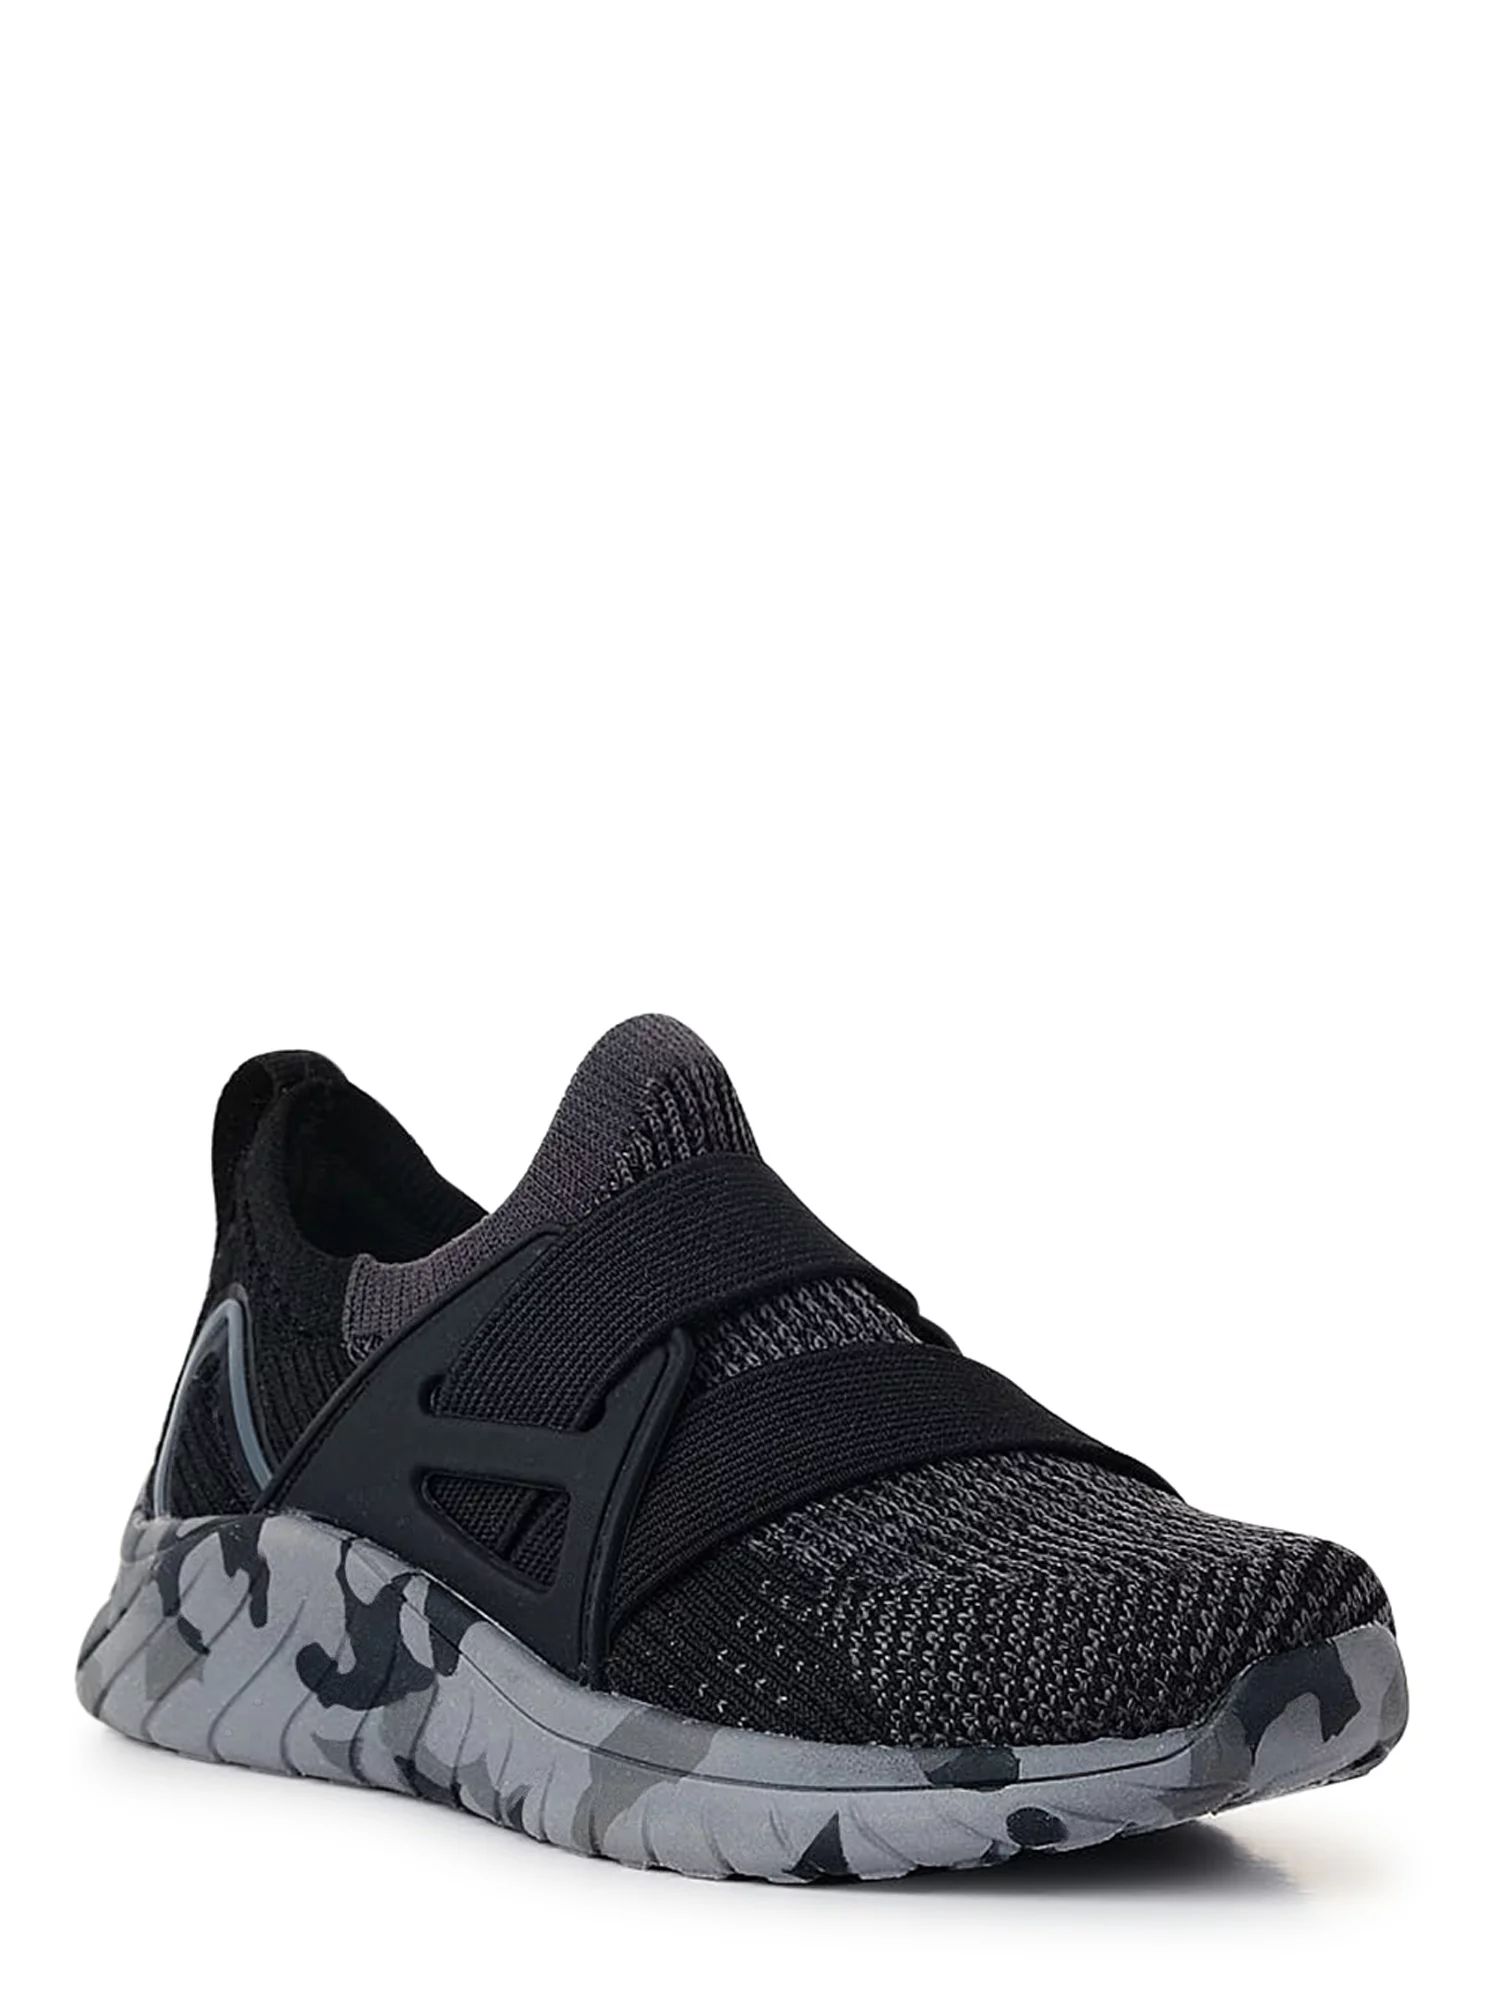 Athletic Works Toddler Boys Knit Cage Athletic Sneakers, Sizes 7-12 | Walmart (US)